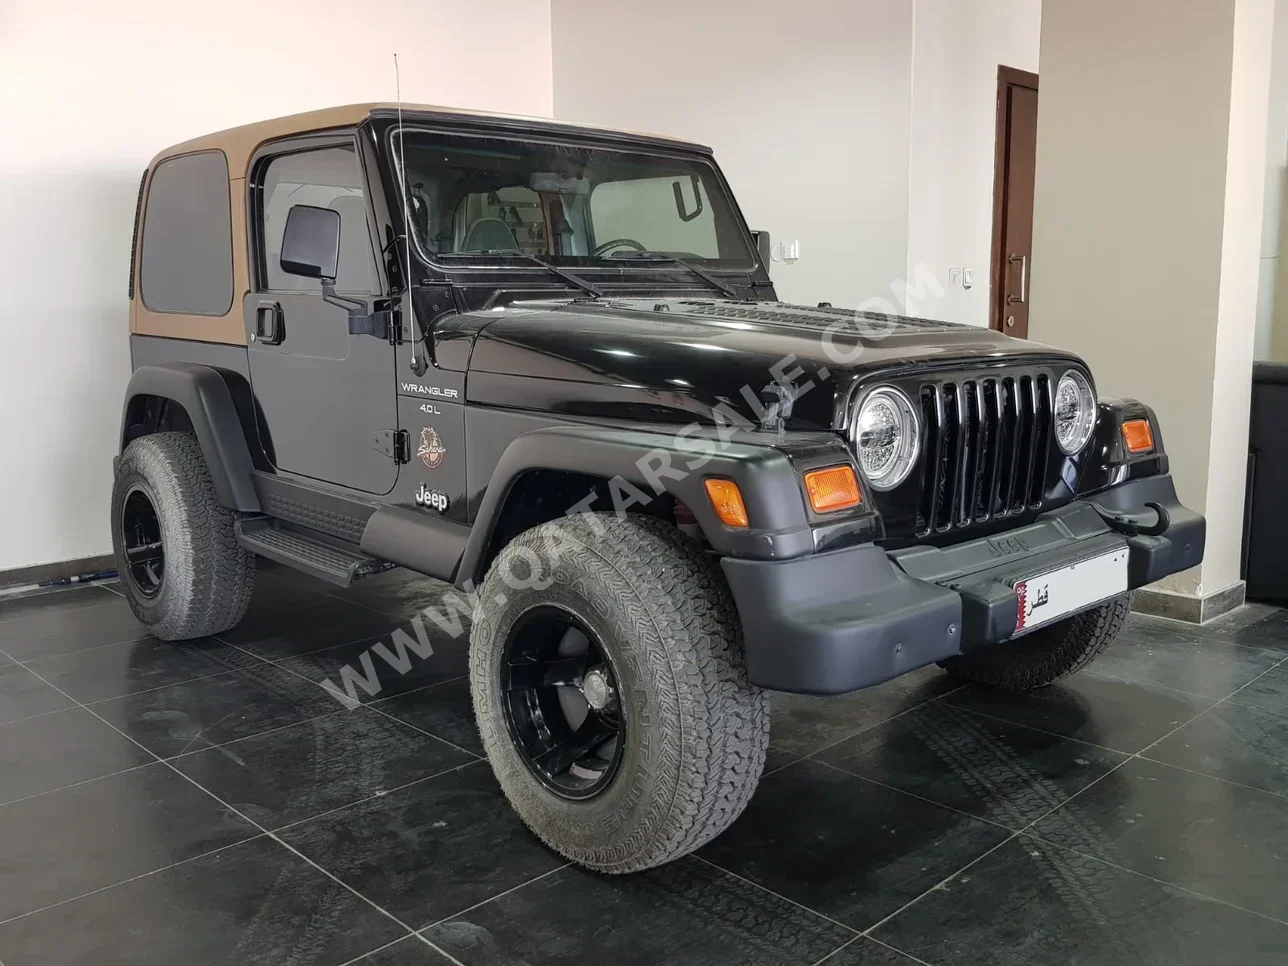 Jeep  Wrangler  1997  Automatic  249,000 Km  6 Cylinder  Four Wheel Drive (4WD)  SUV  Black and Beige